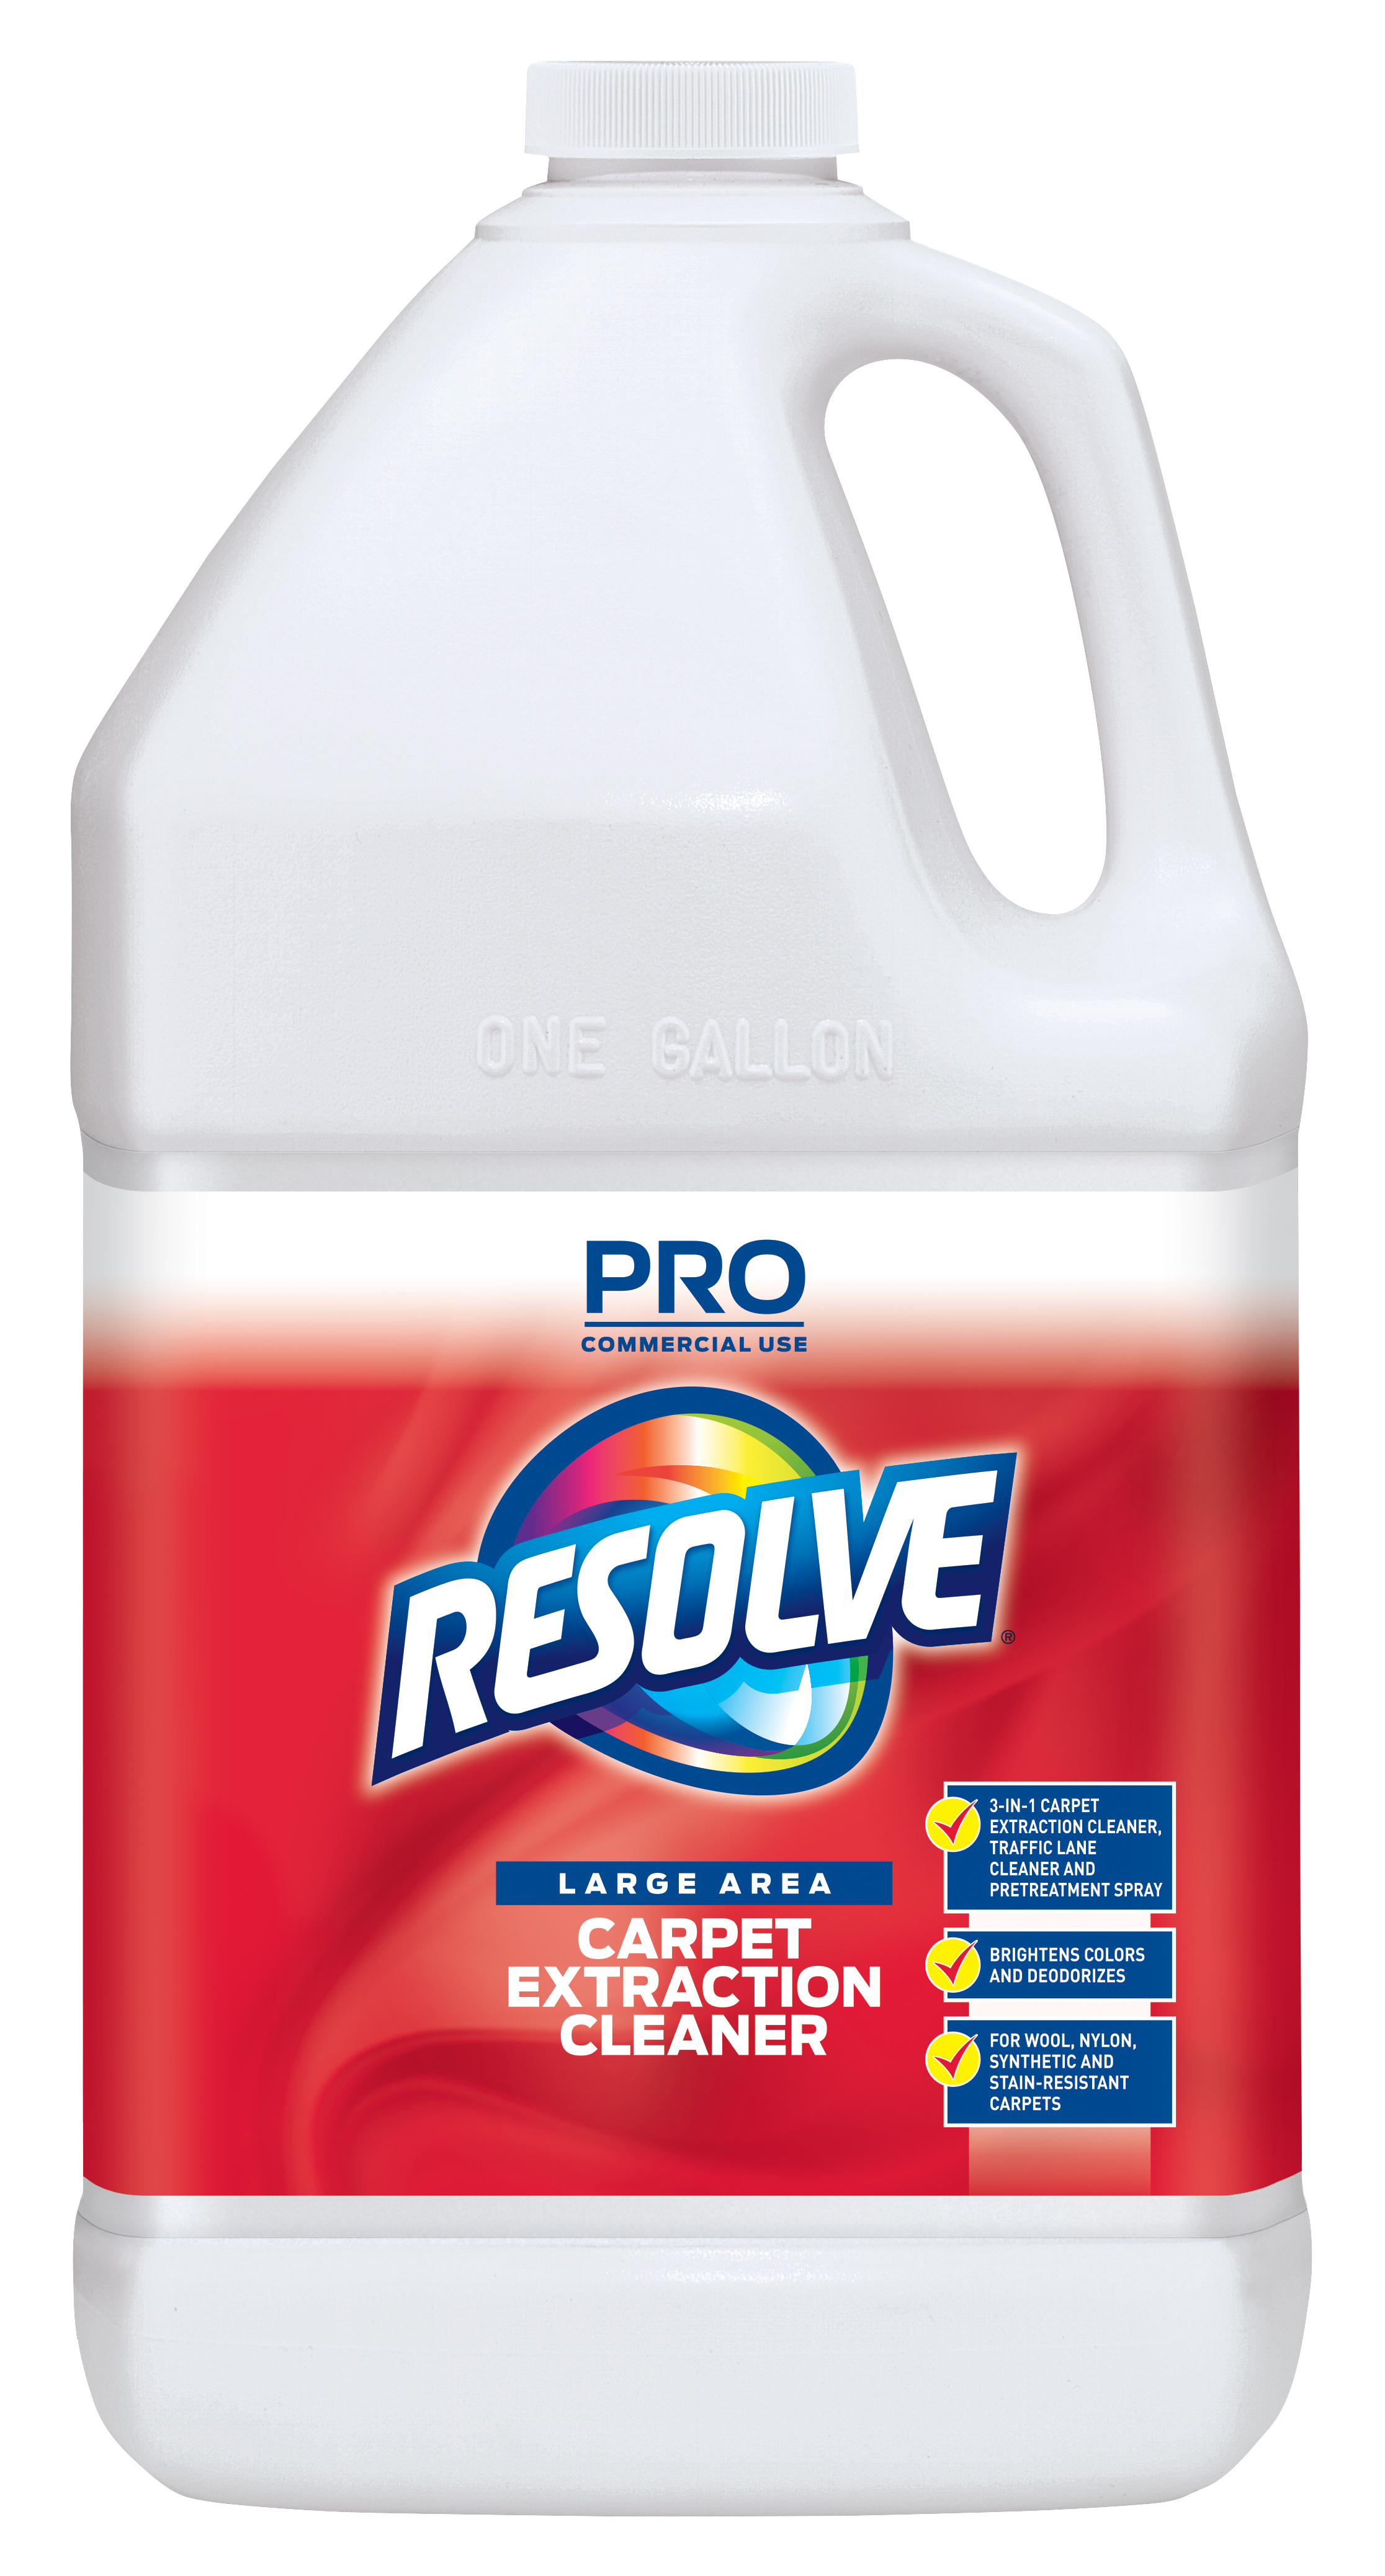 Professional RESOLVE Carpet Extraction Cleaner